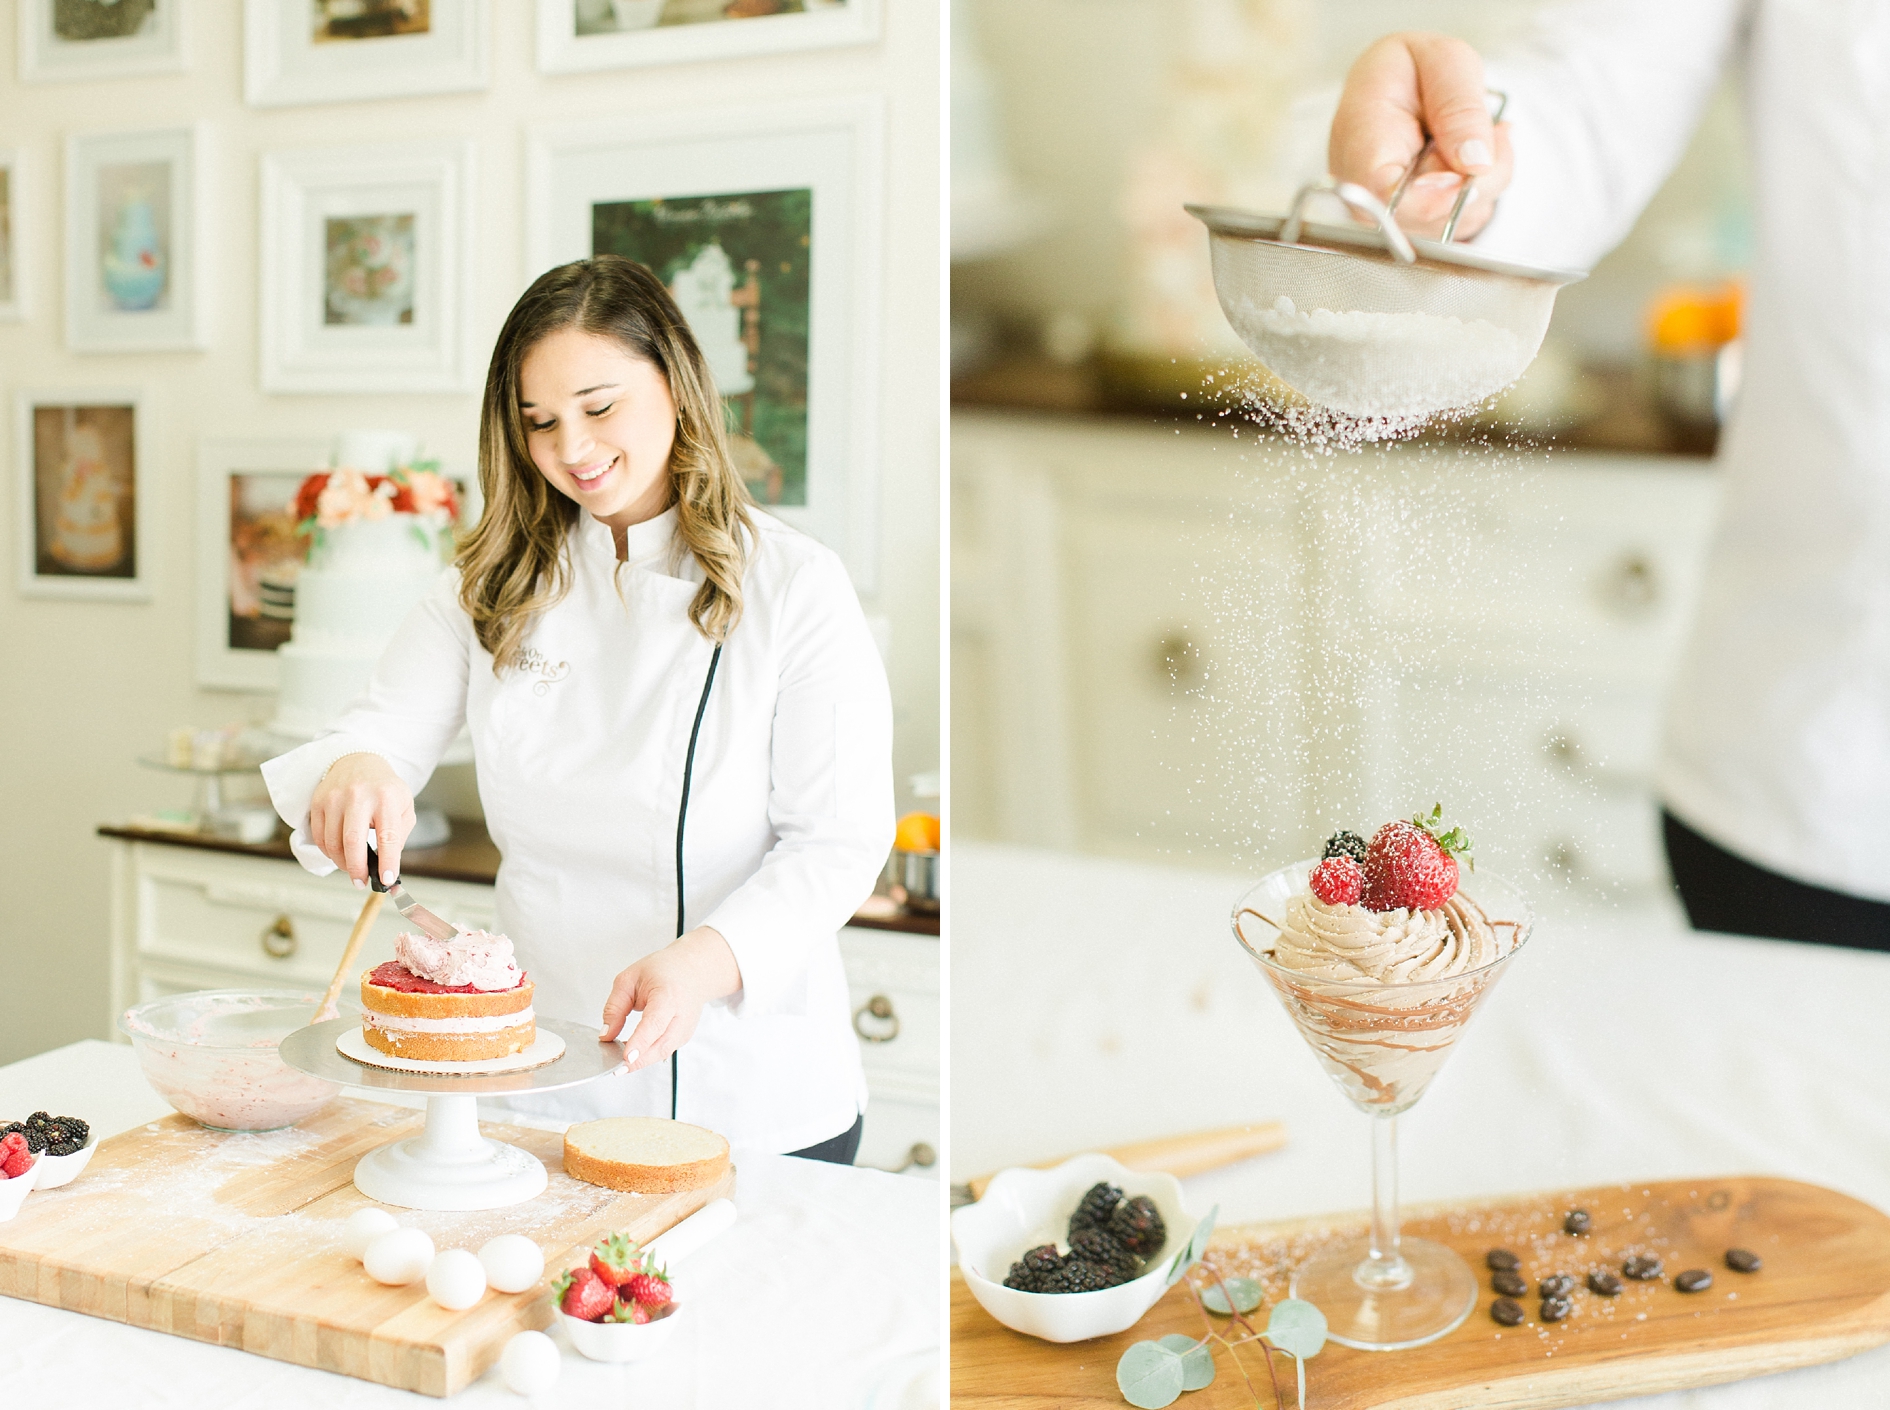 Hands on Sweets | Tampa Photographer | © Ailyn La Torre Photography 2017